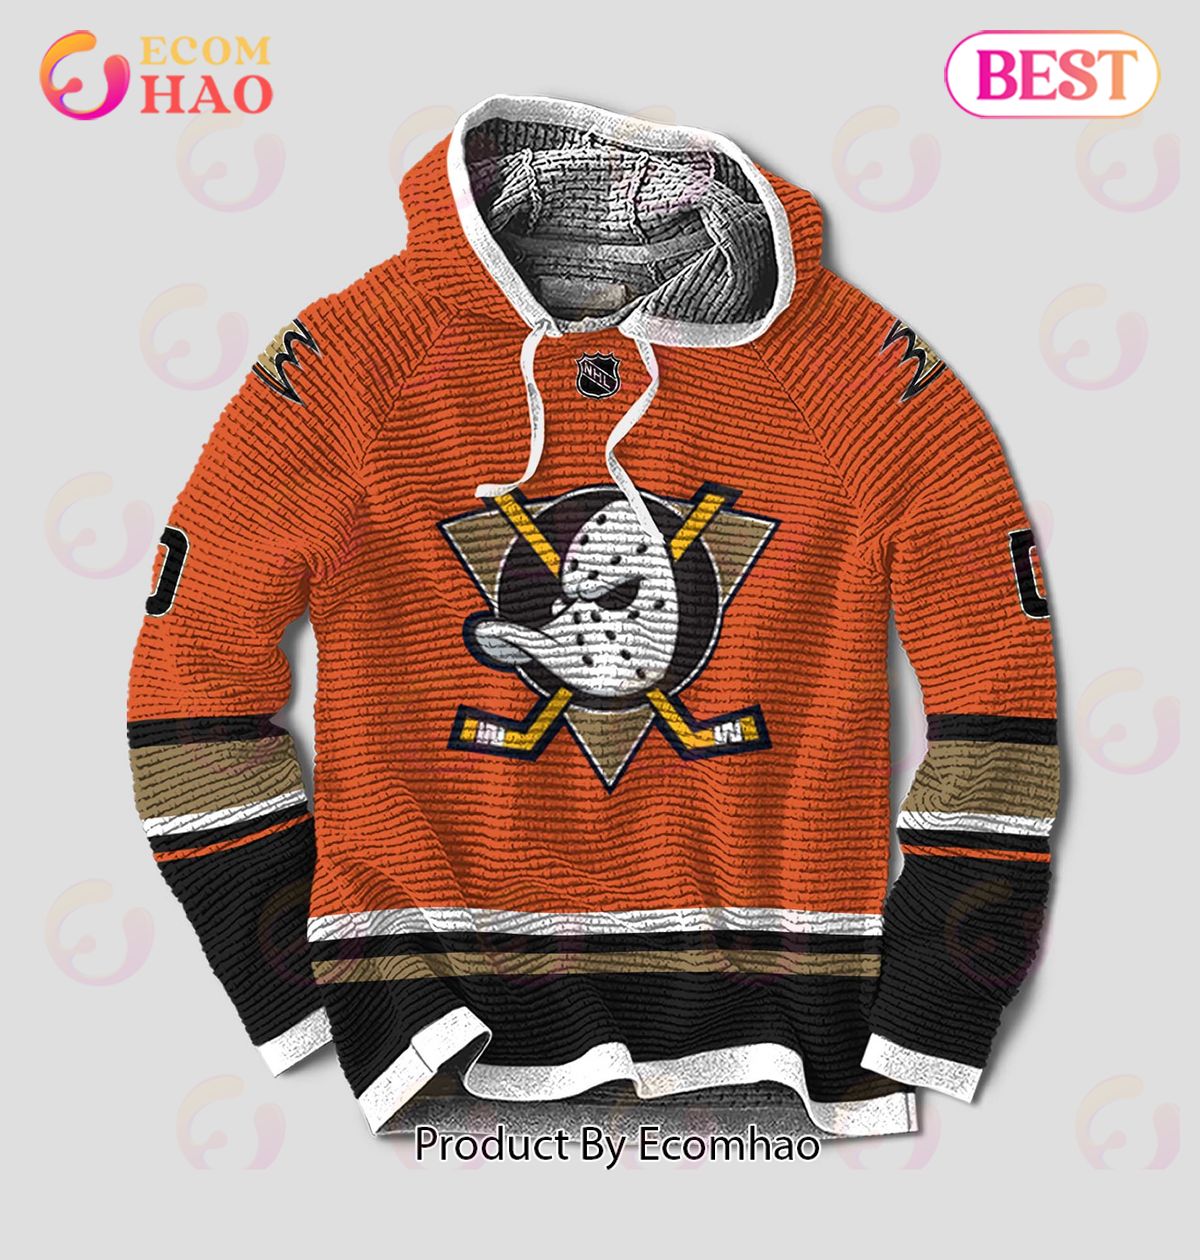 NHL Anaheim Ducks Limited Edition Personalized 3D Hoodie Full Printing